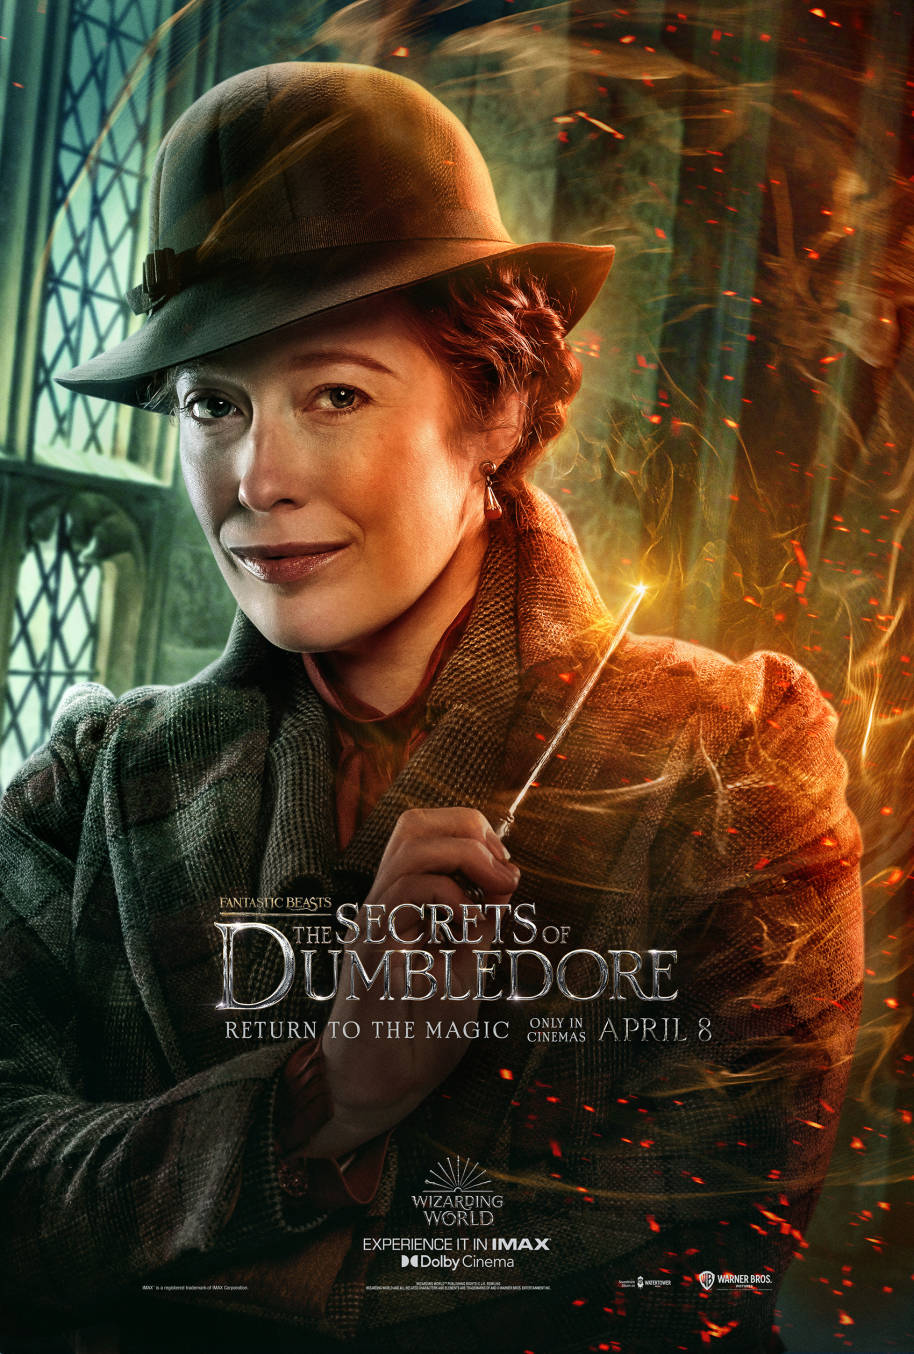 Bunty in the Fantastic Beasts: The Secrets of Dumbledore poster, played by Victoria Yeates.